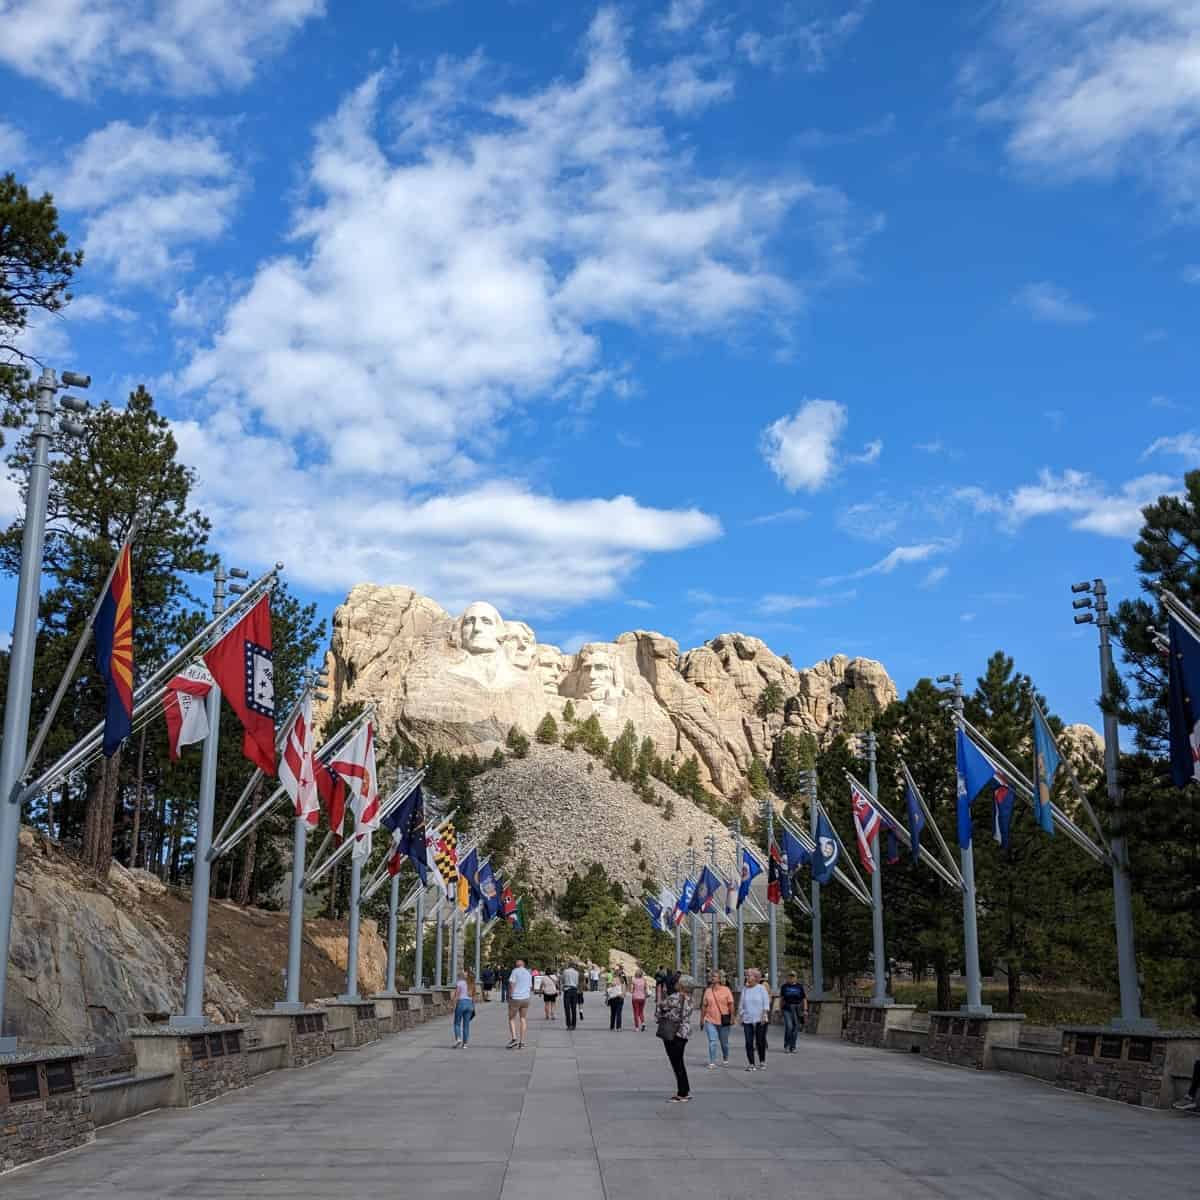 Tourists on a large walkway flanked in state flags, leading to Mount Rushmore.